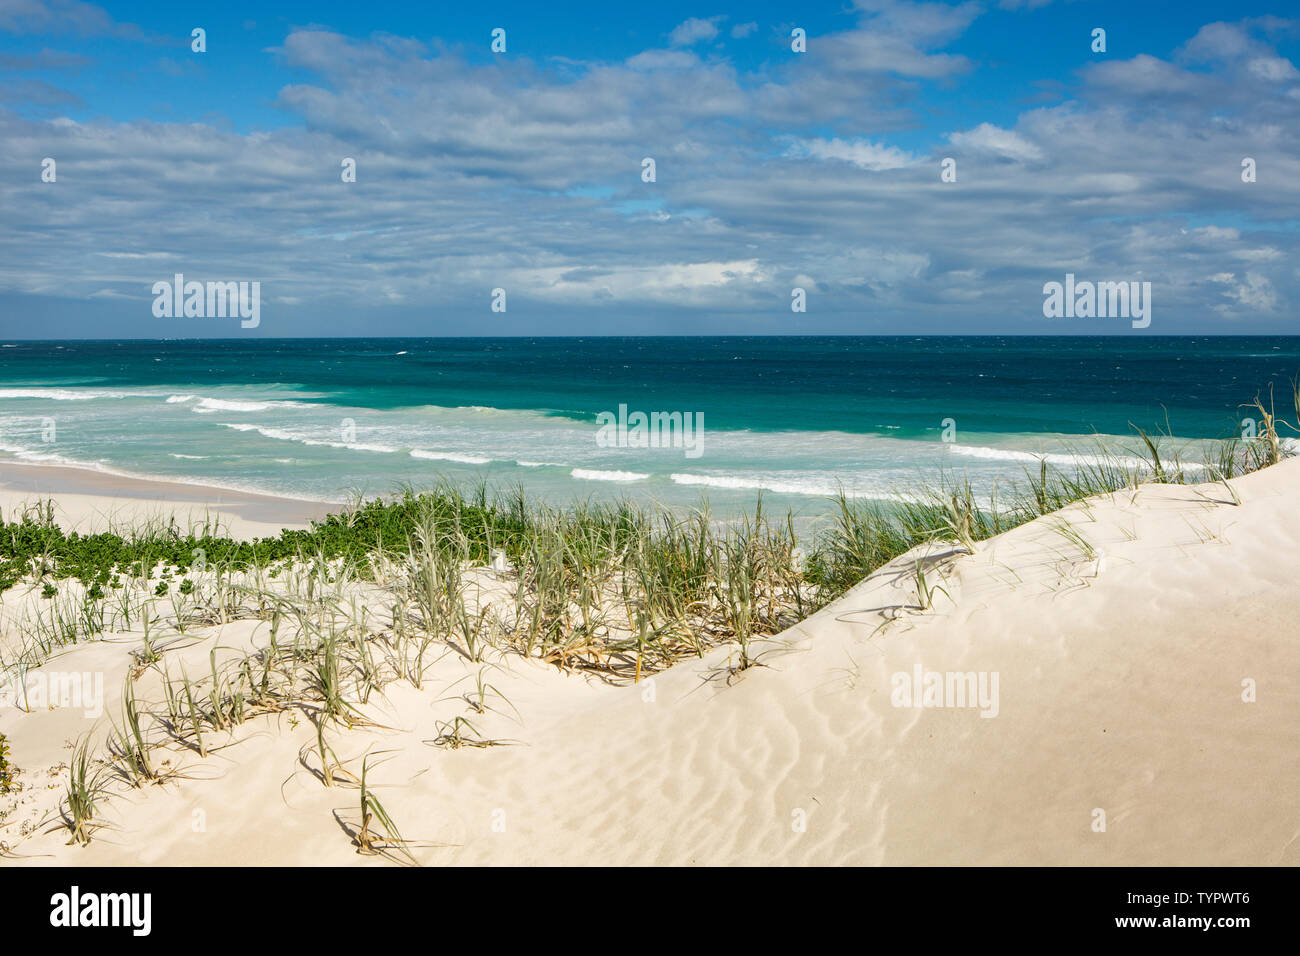 wide angle view of a white sandy beach with high dunes in Western Australia with big waves breaking on the beach Stock Photo